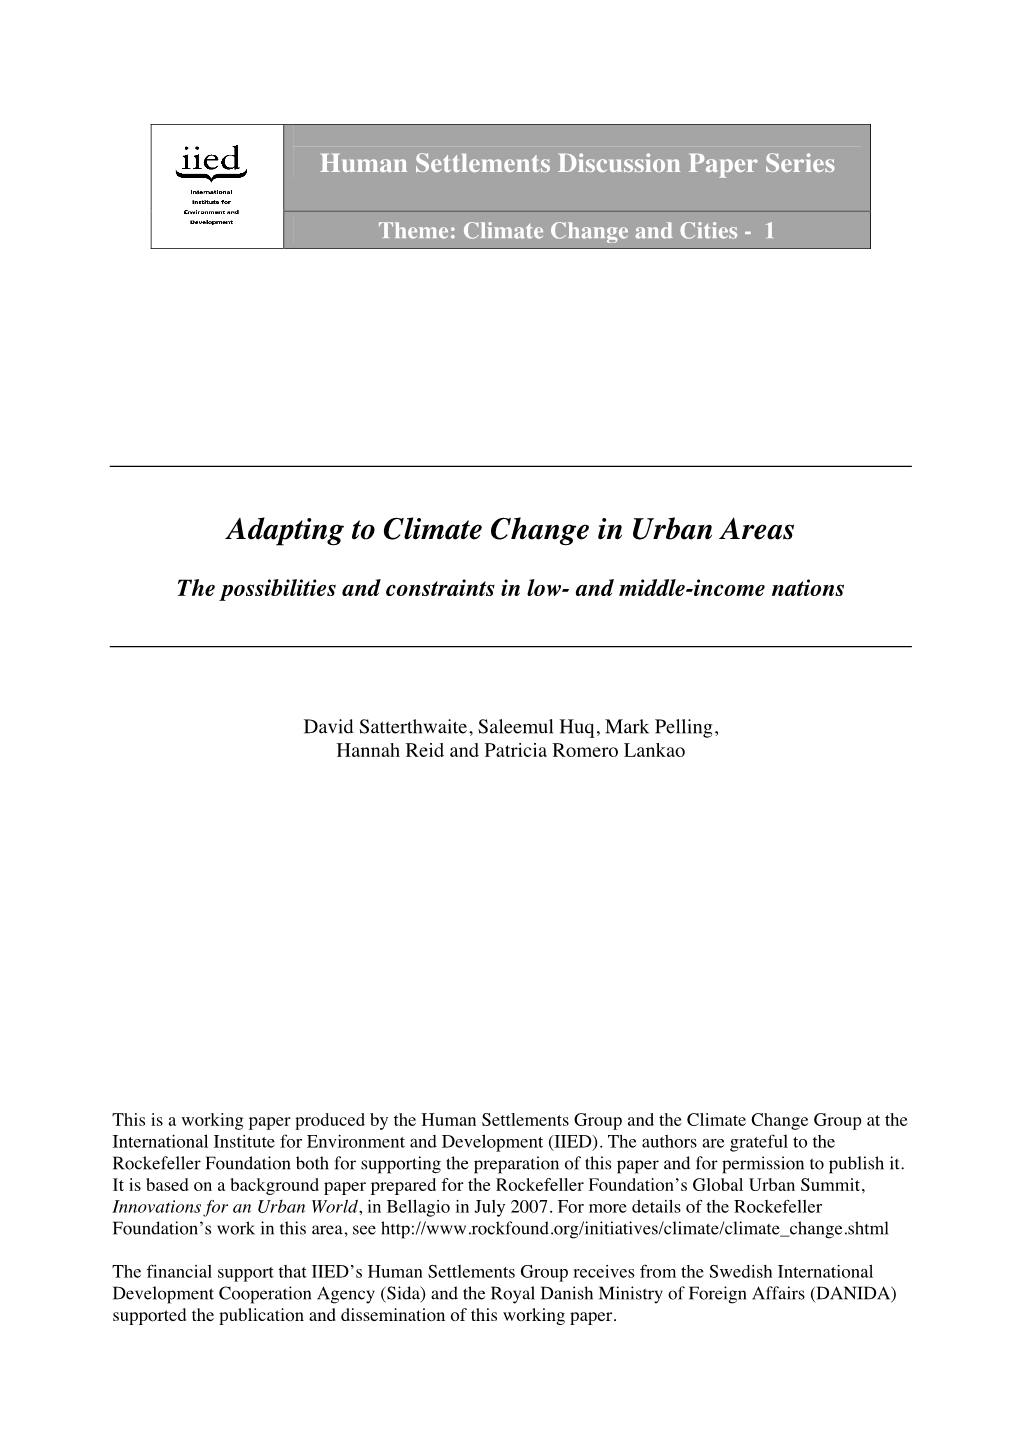 Adapting to Climate Change in Urban Areas